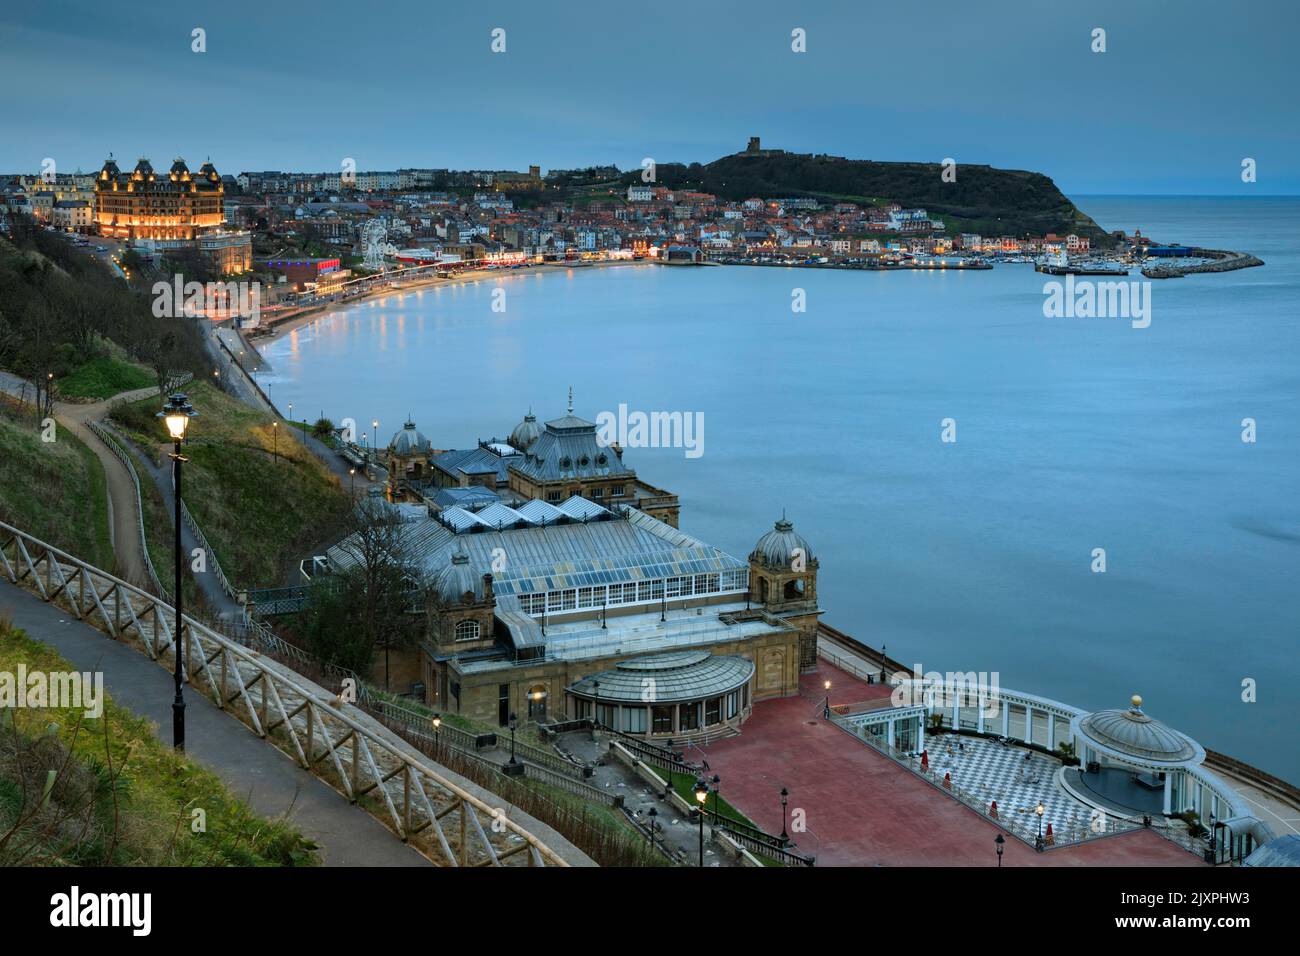 South Bay at Scarborough with the spa in the foreground captured during twilight on an evening in the spring. Stock Photo